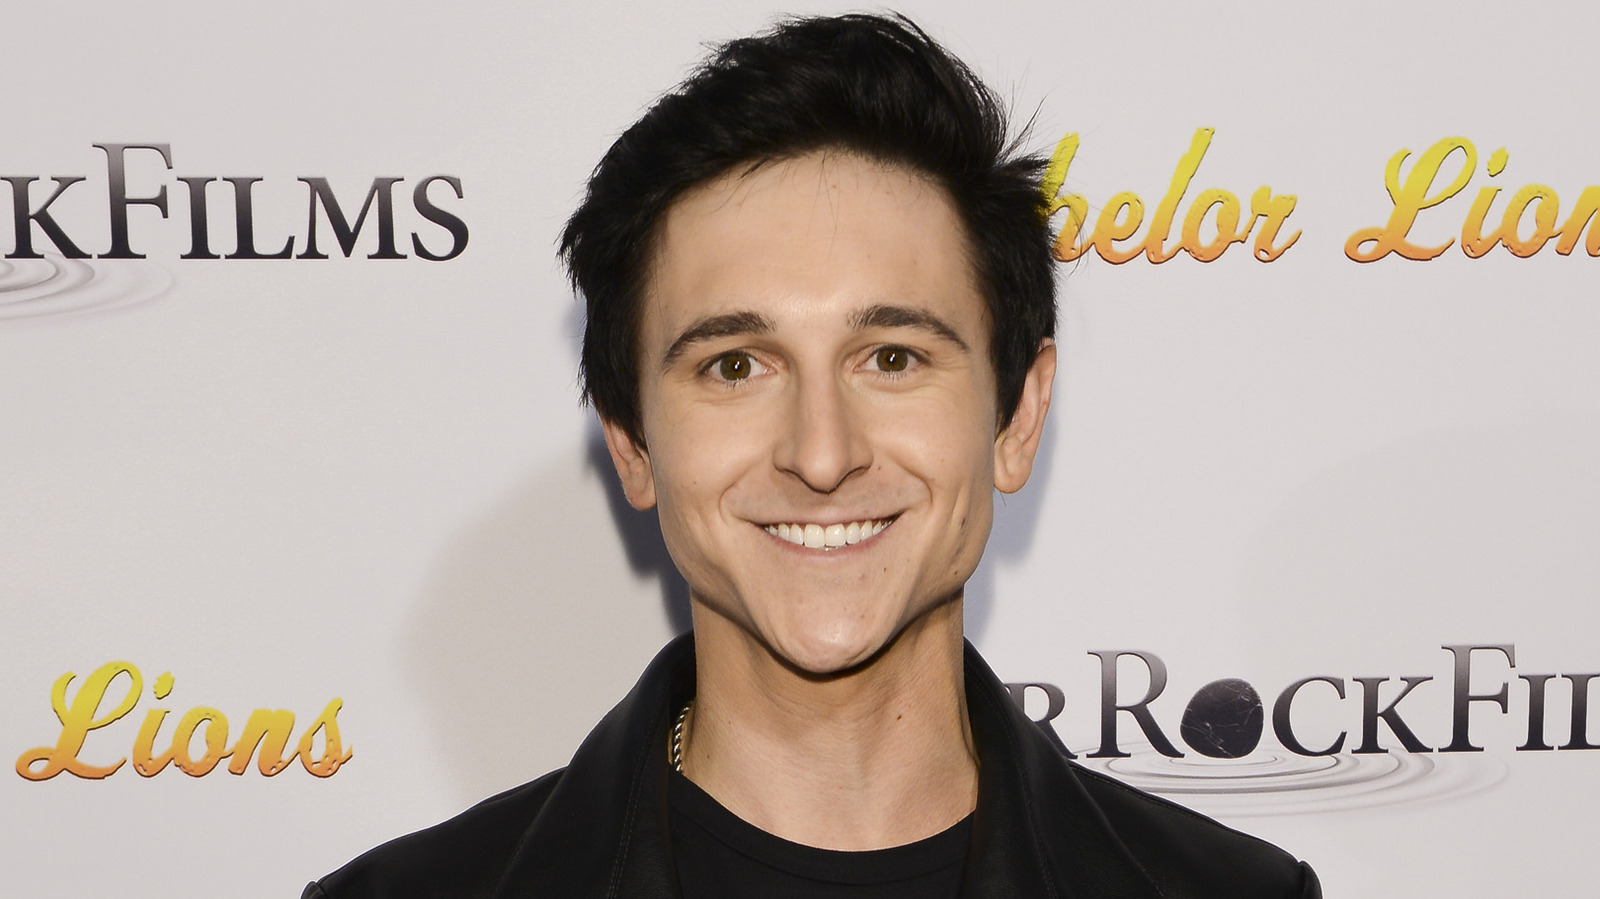 hannah montana star mitchel musso looks unrecognizable in miserable mugshot